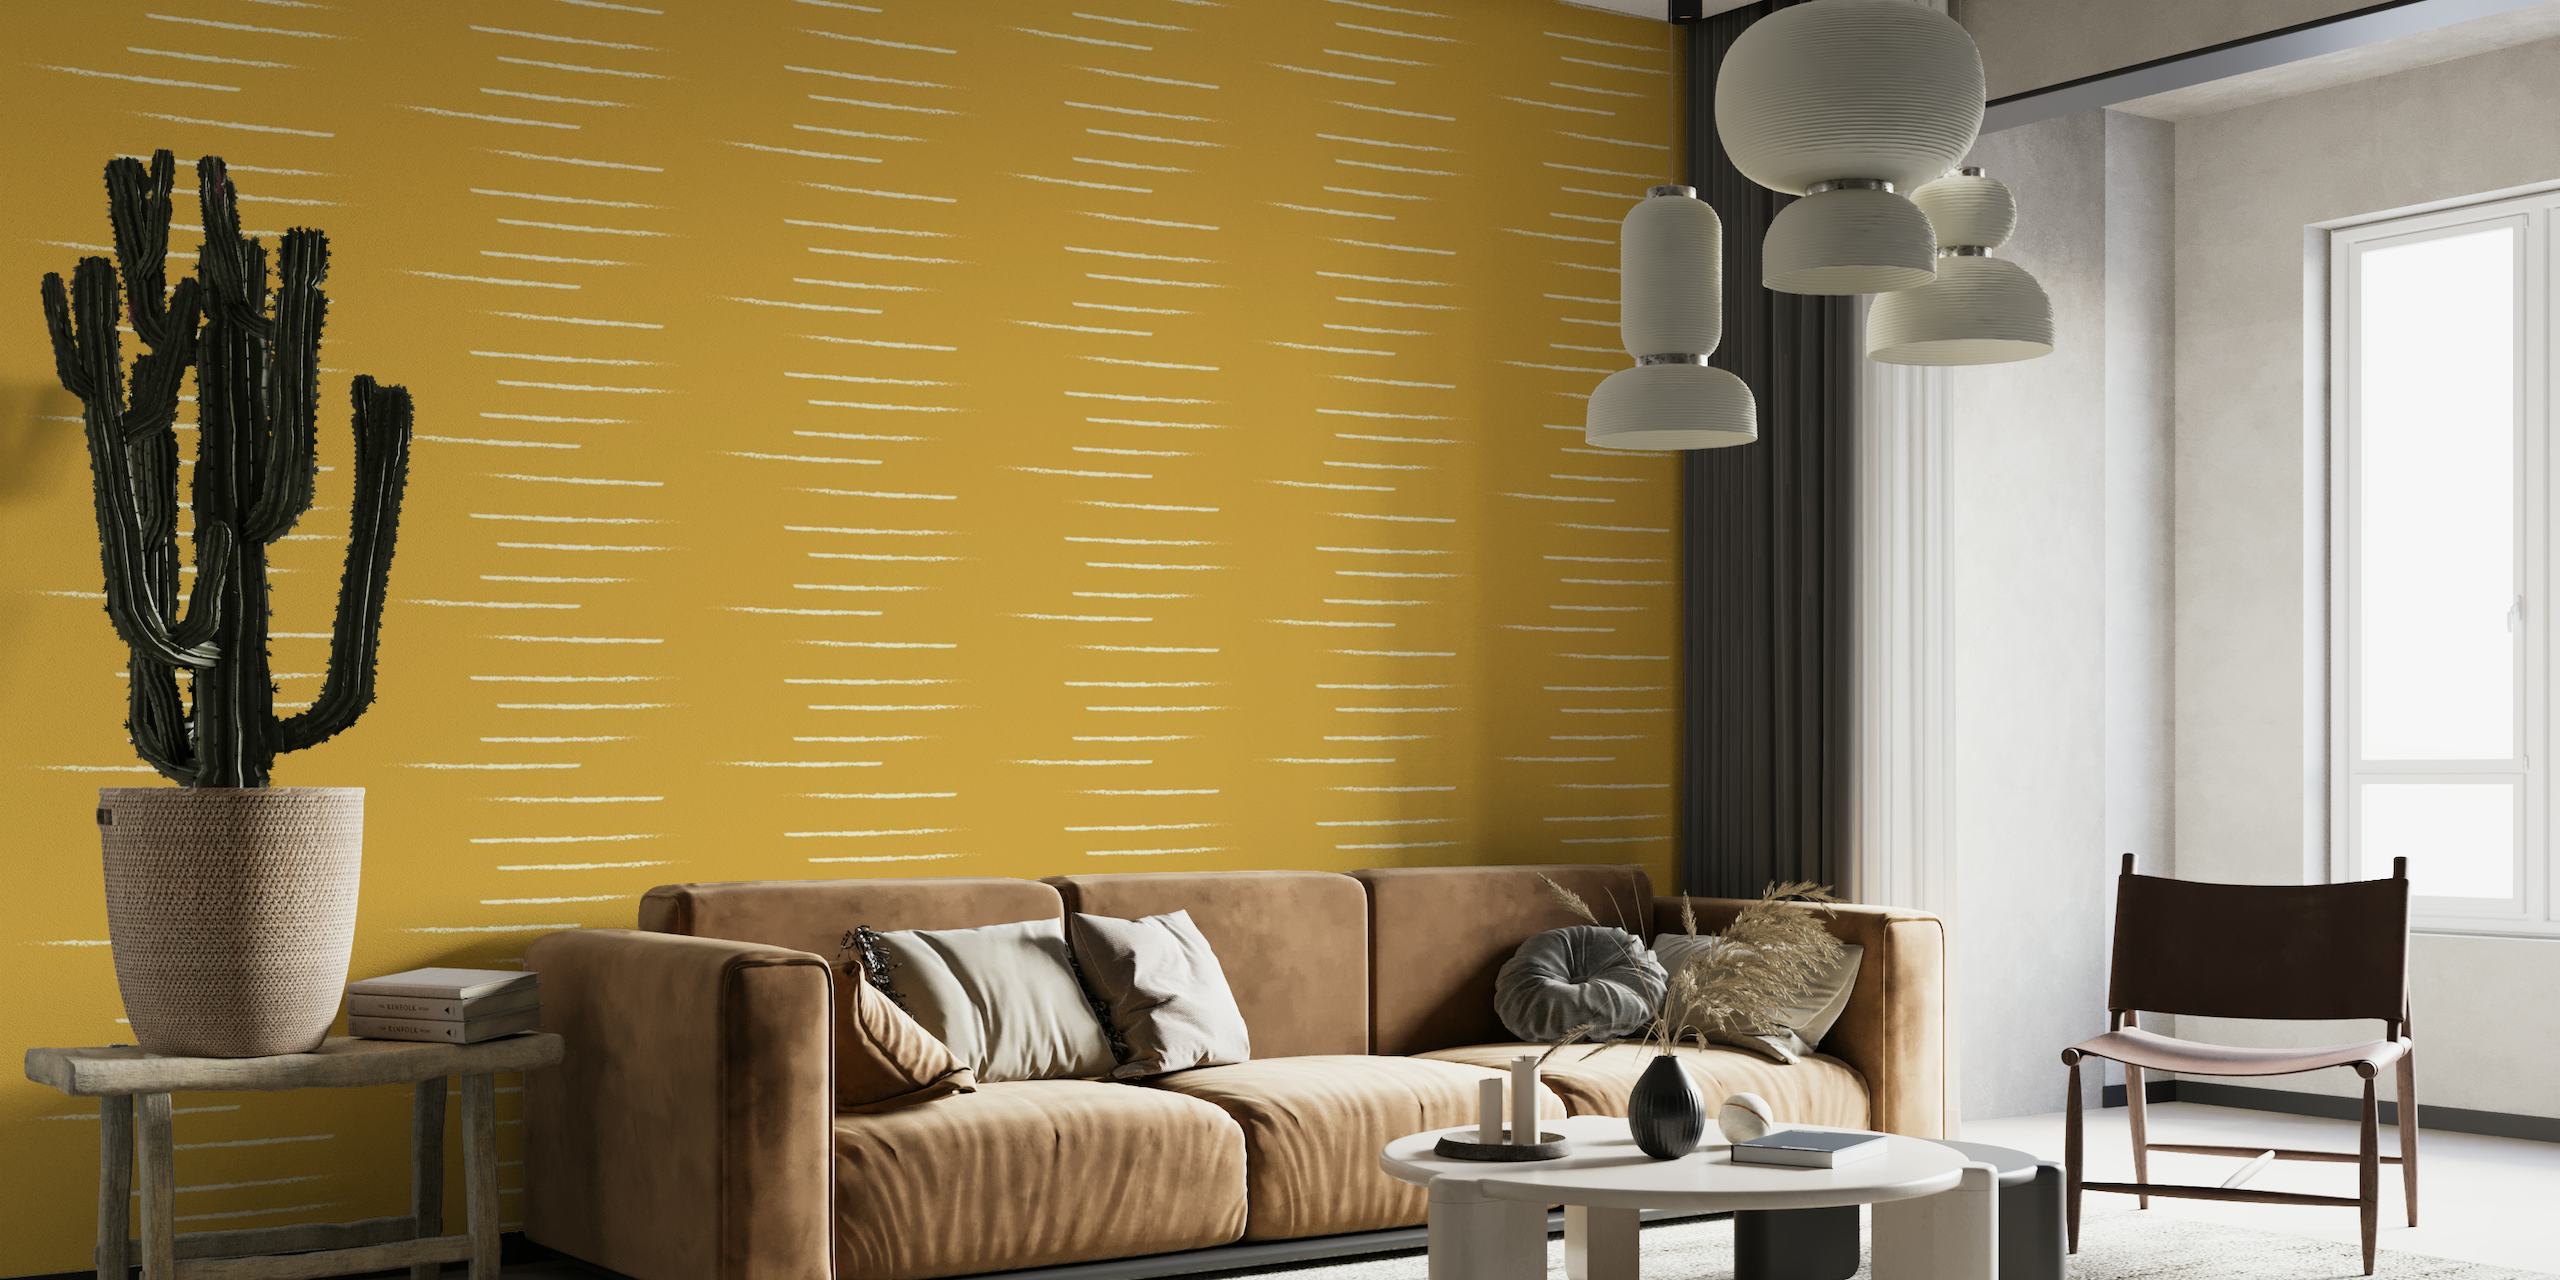 Horizontal striped wall mural in mustard beige tones reflecting a warm and minimalist style